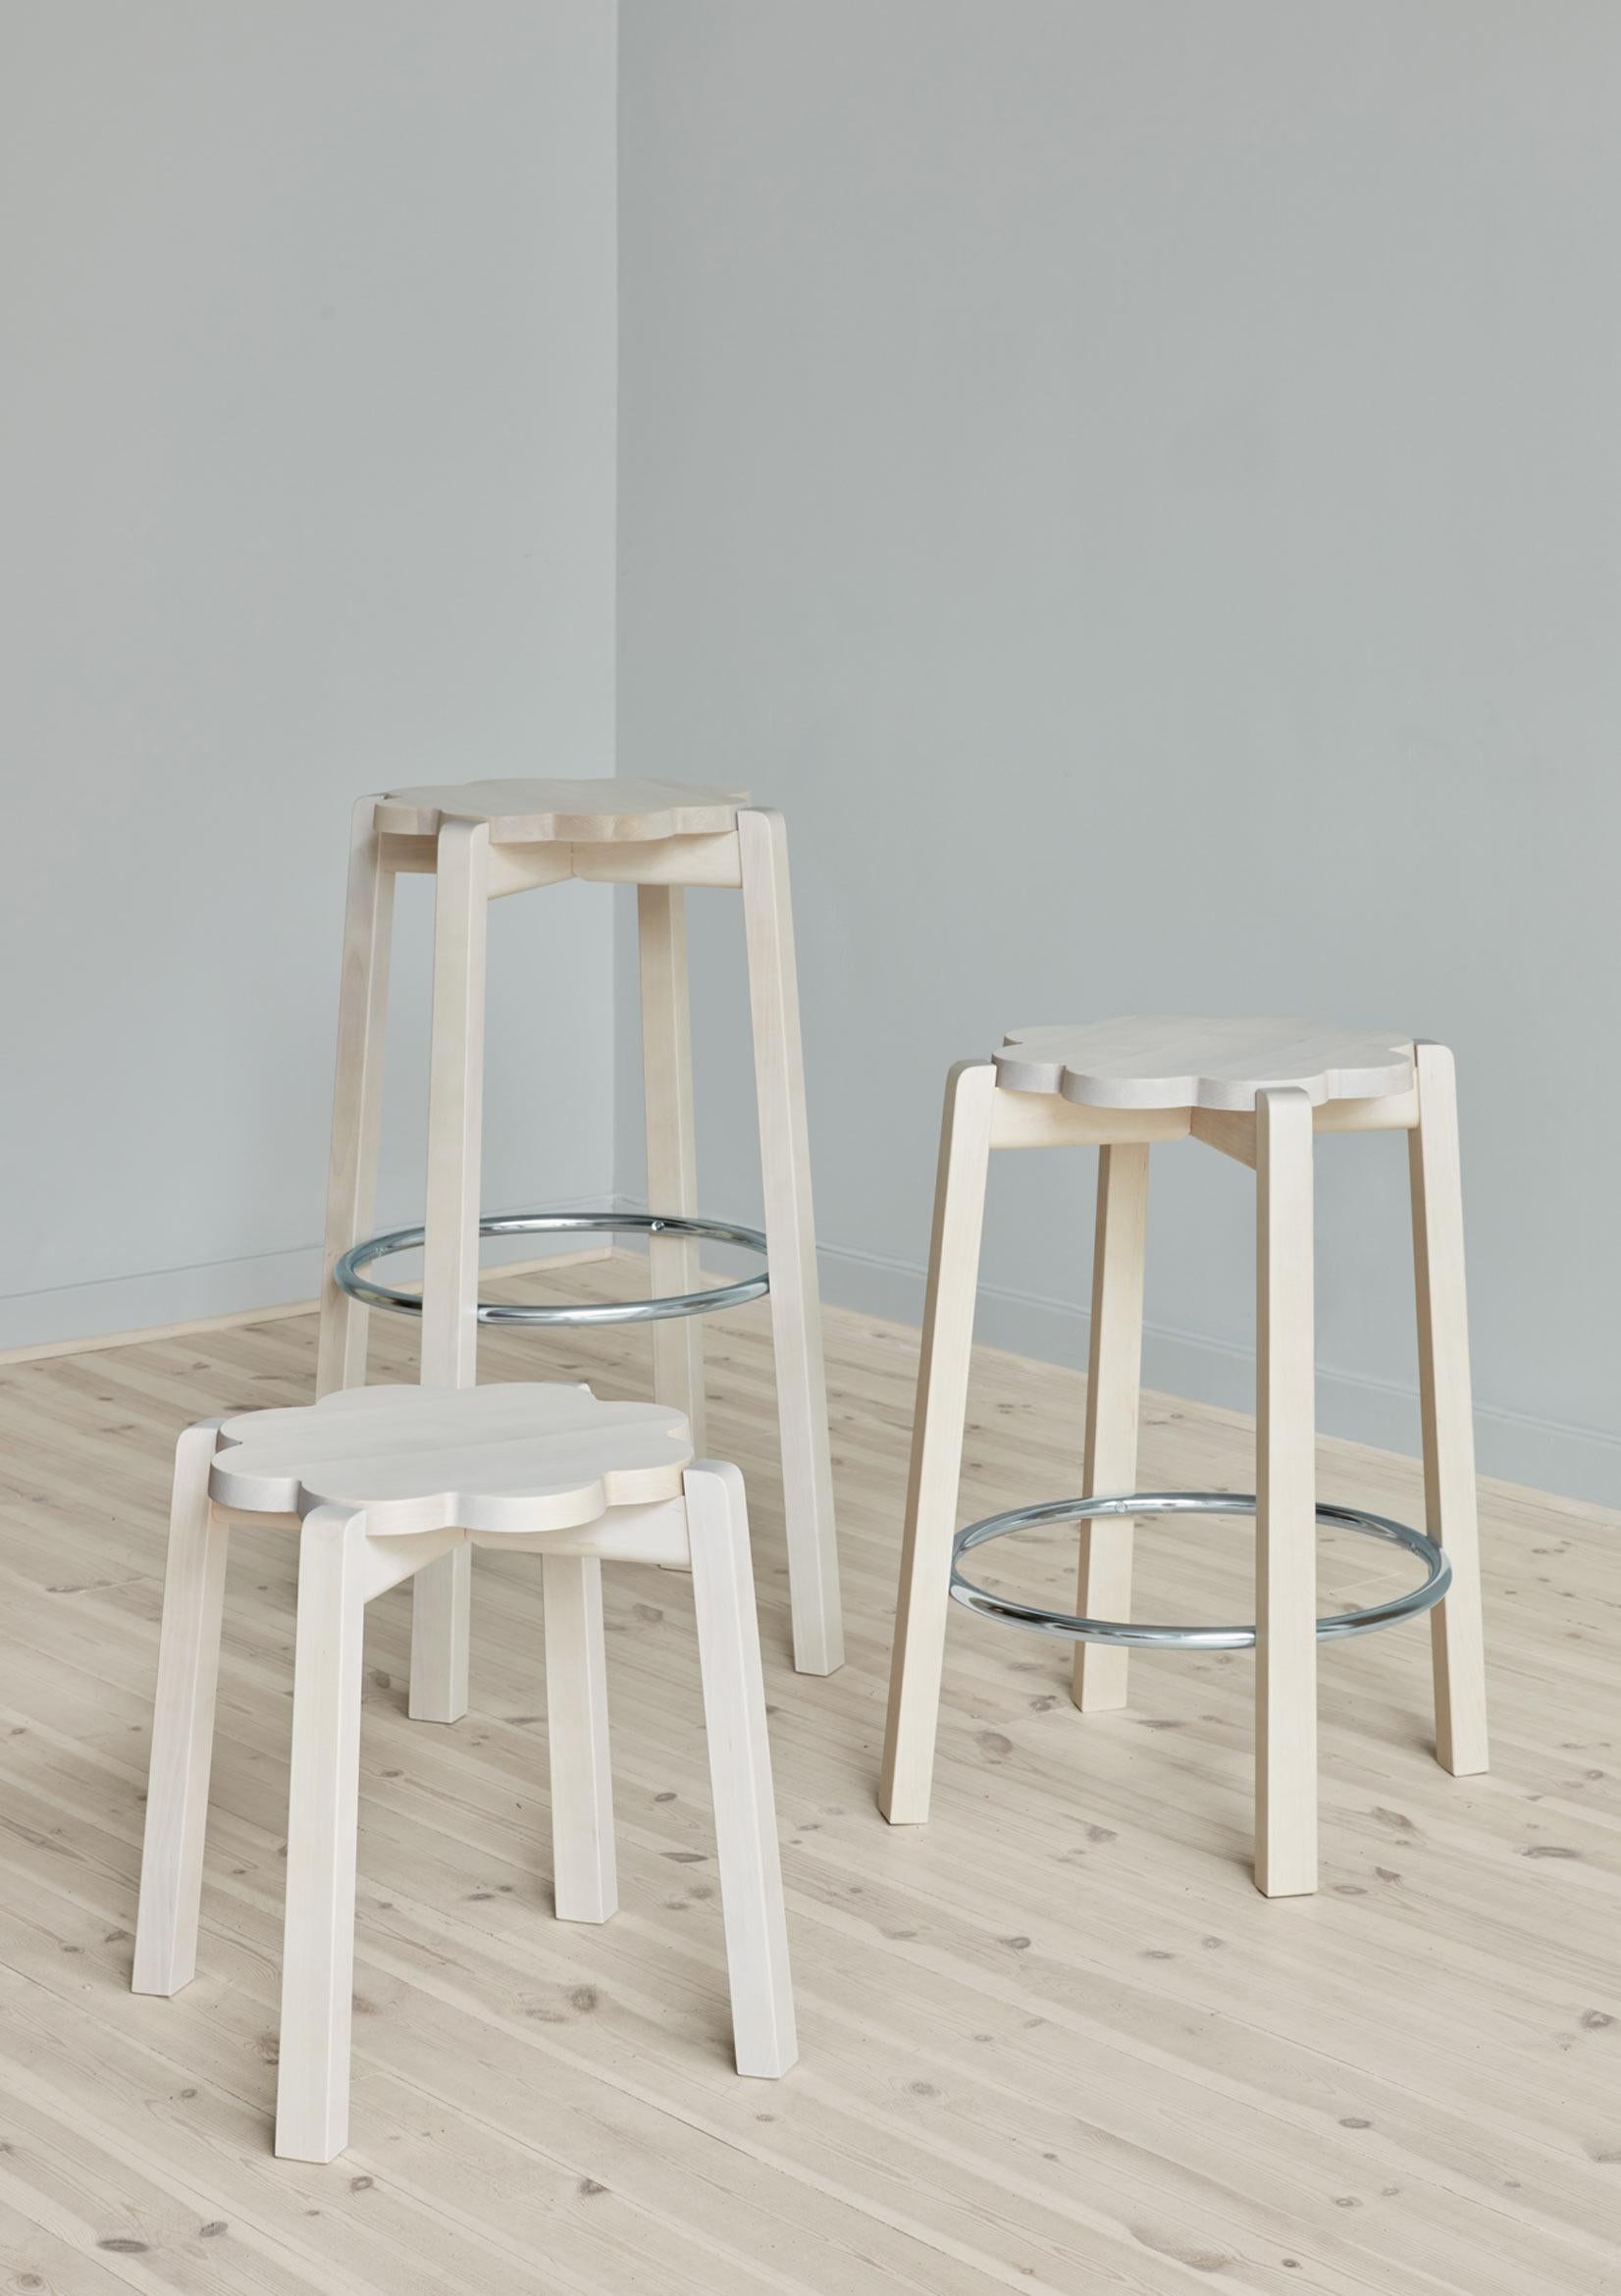 Other Large Natural Blossom Bar Chair by Storängen Design